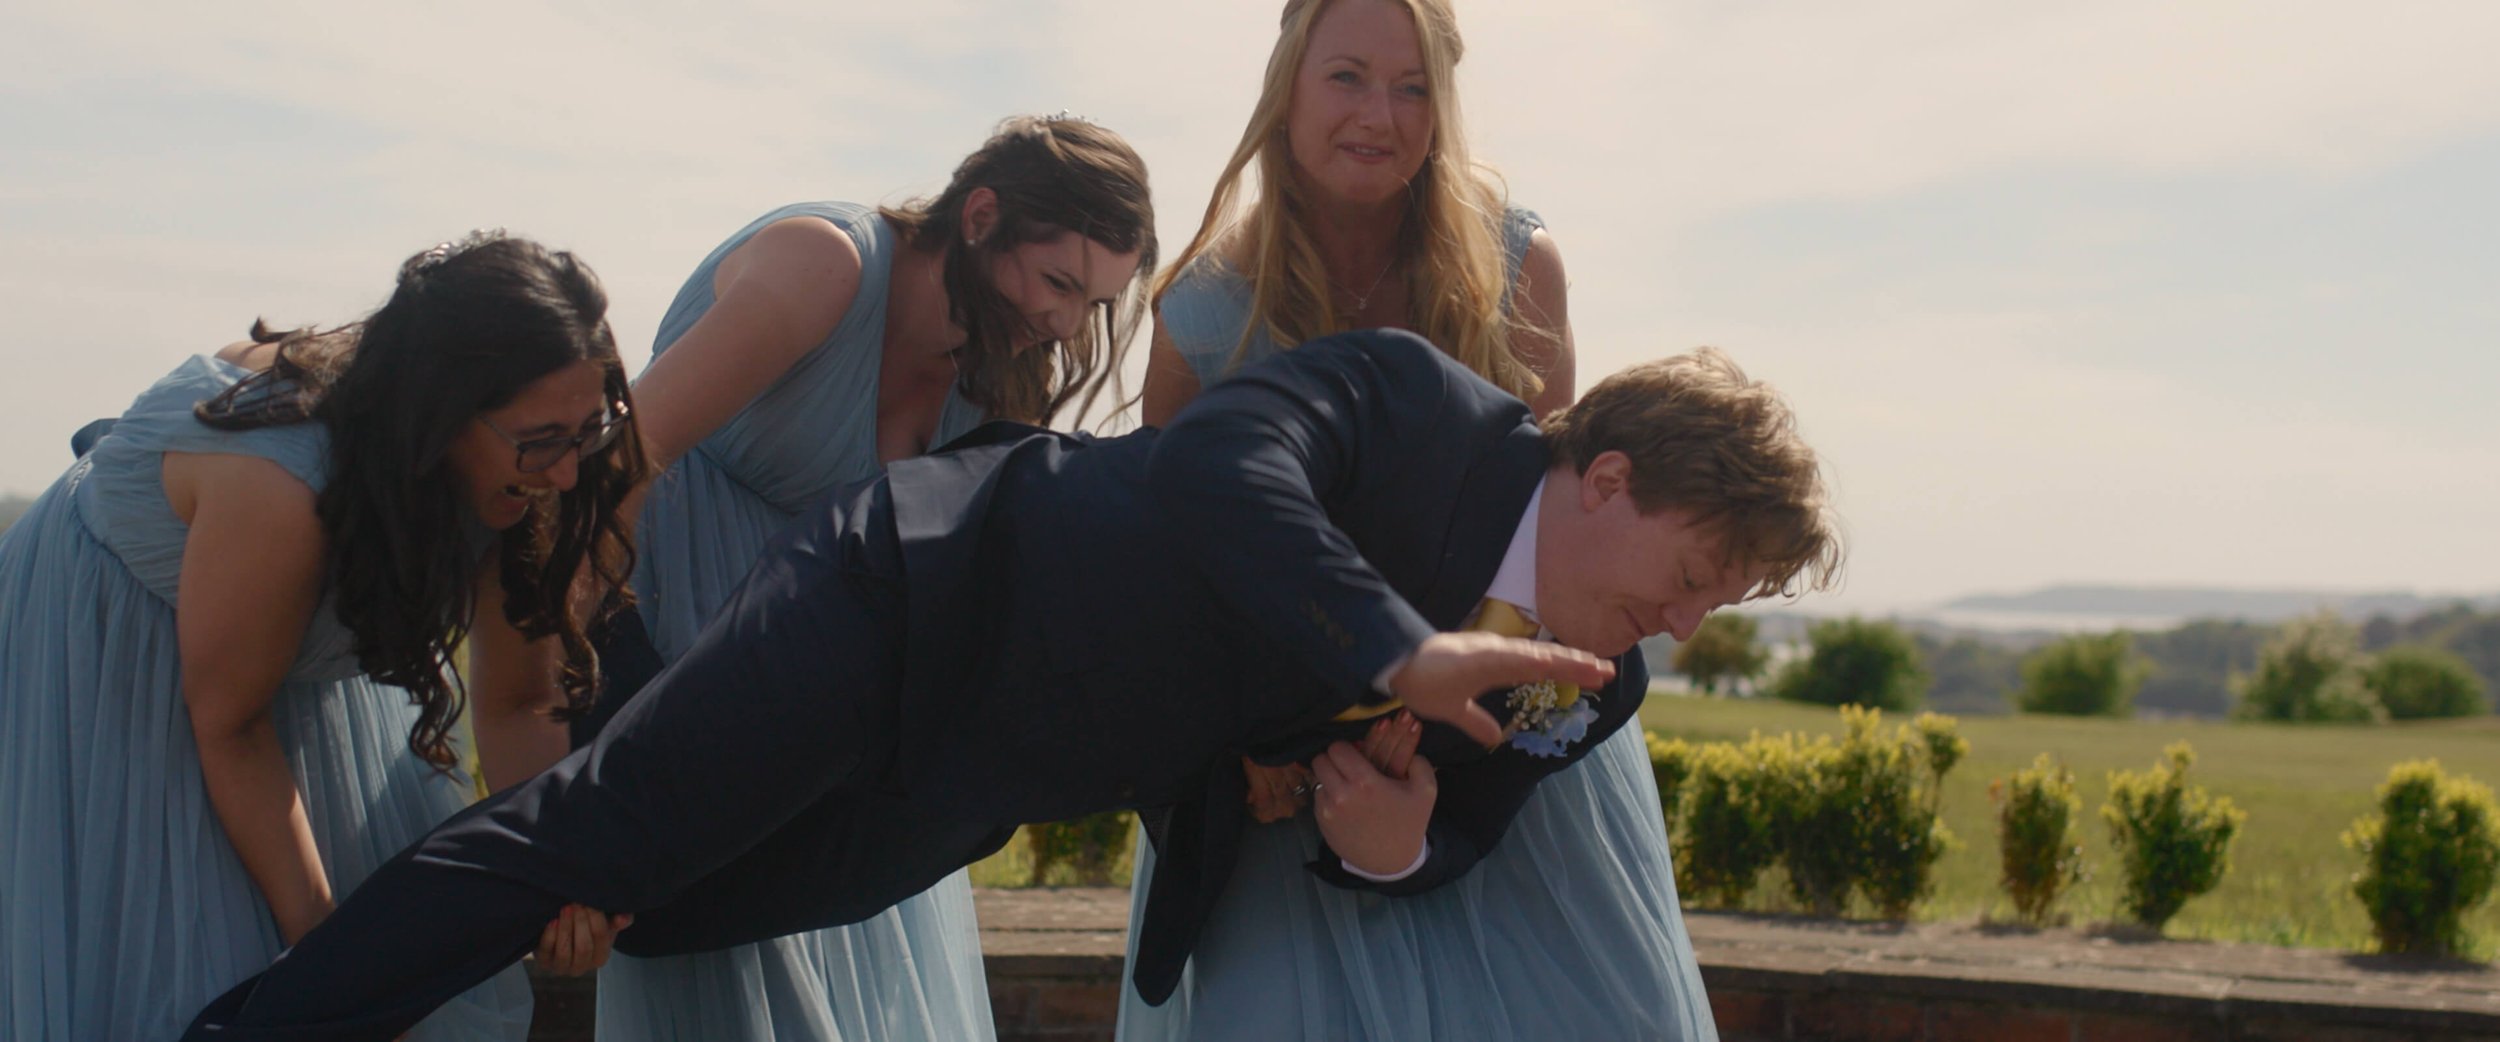 Dael captured mid-fall as the bridesmaids try to pick up him and fail